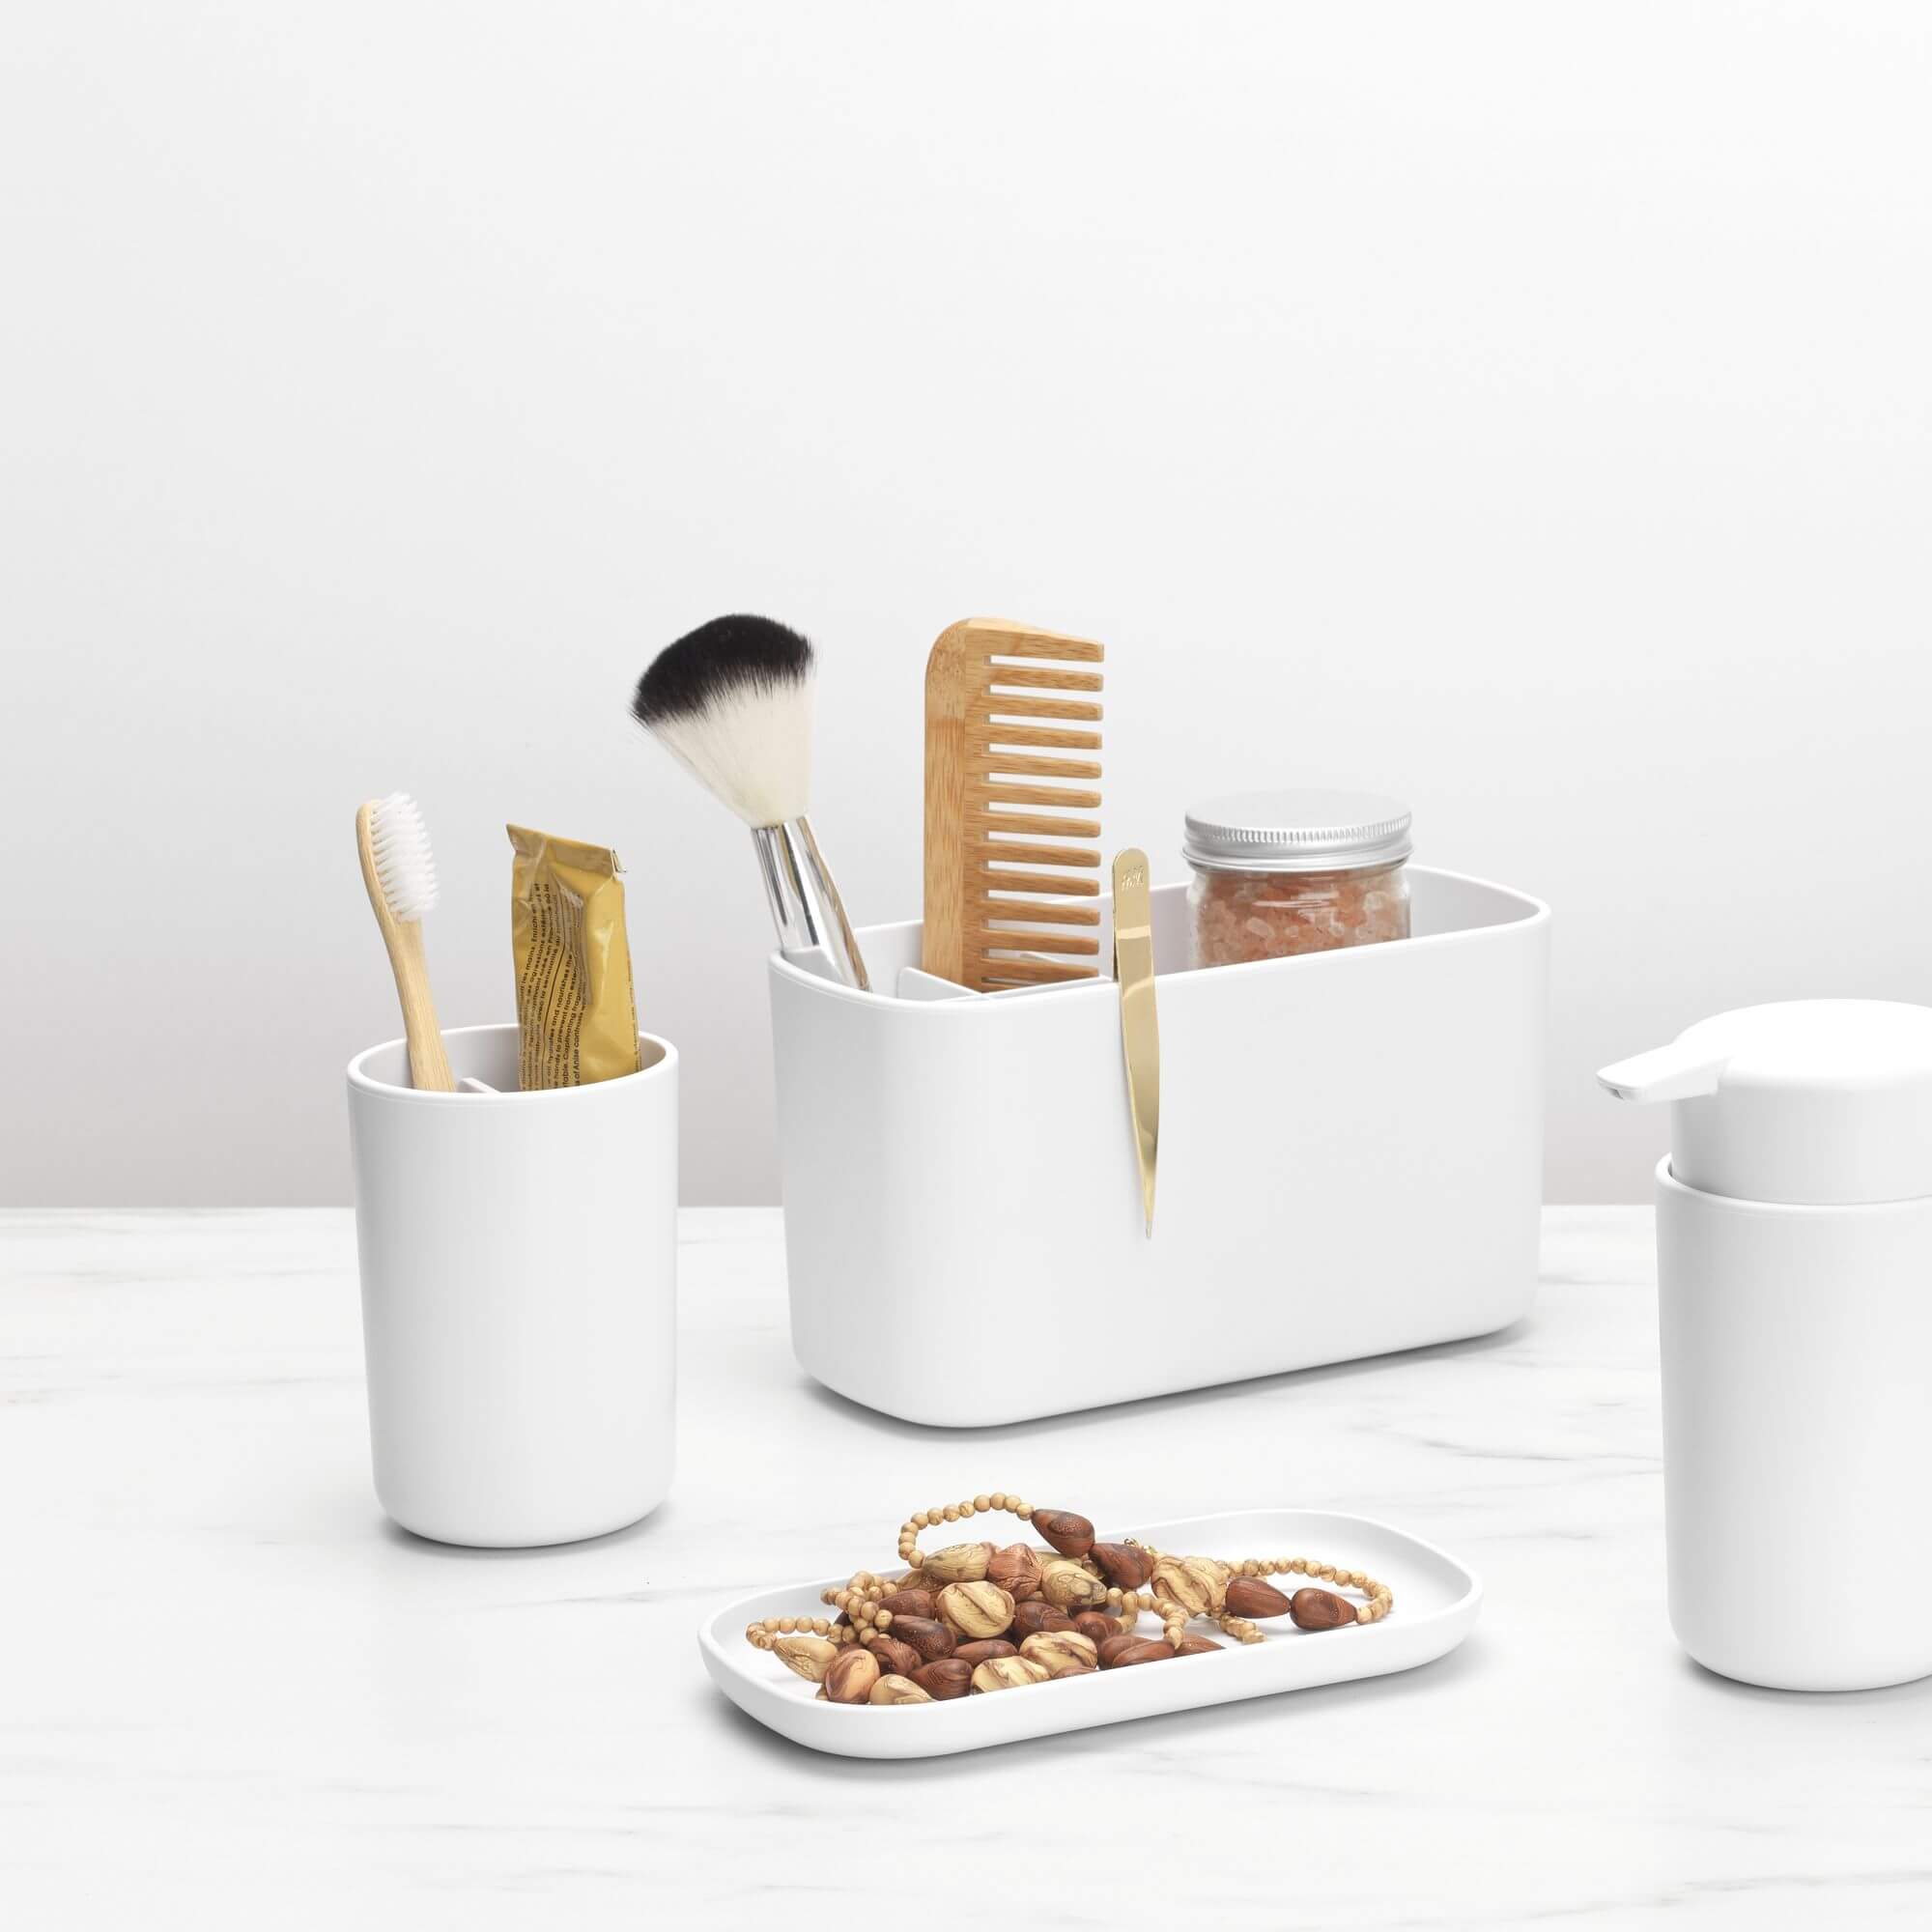 A white Brabantia toothbrush holder and tumbler on a marble benchtop